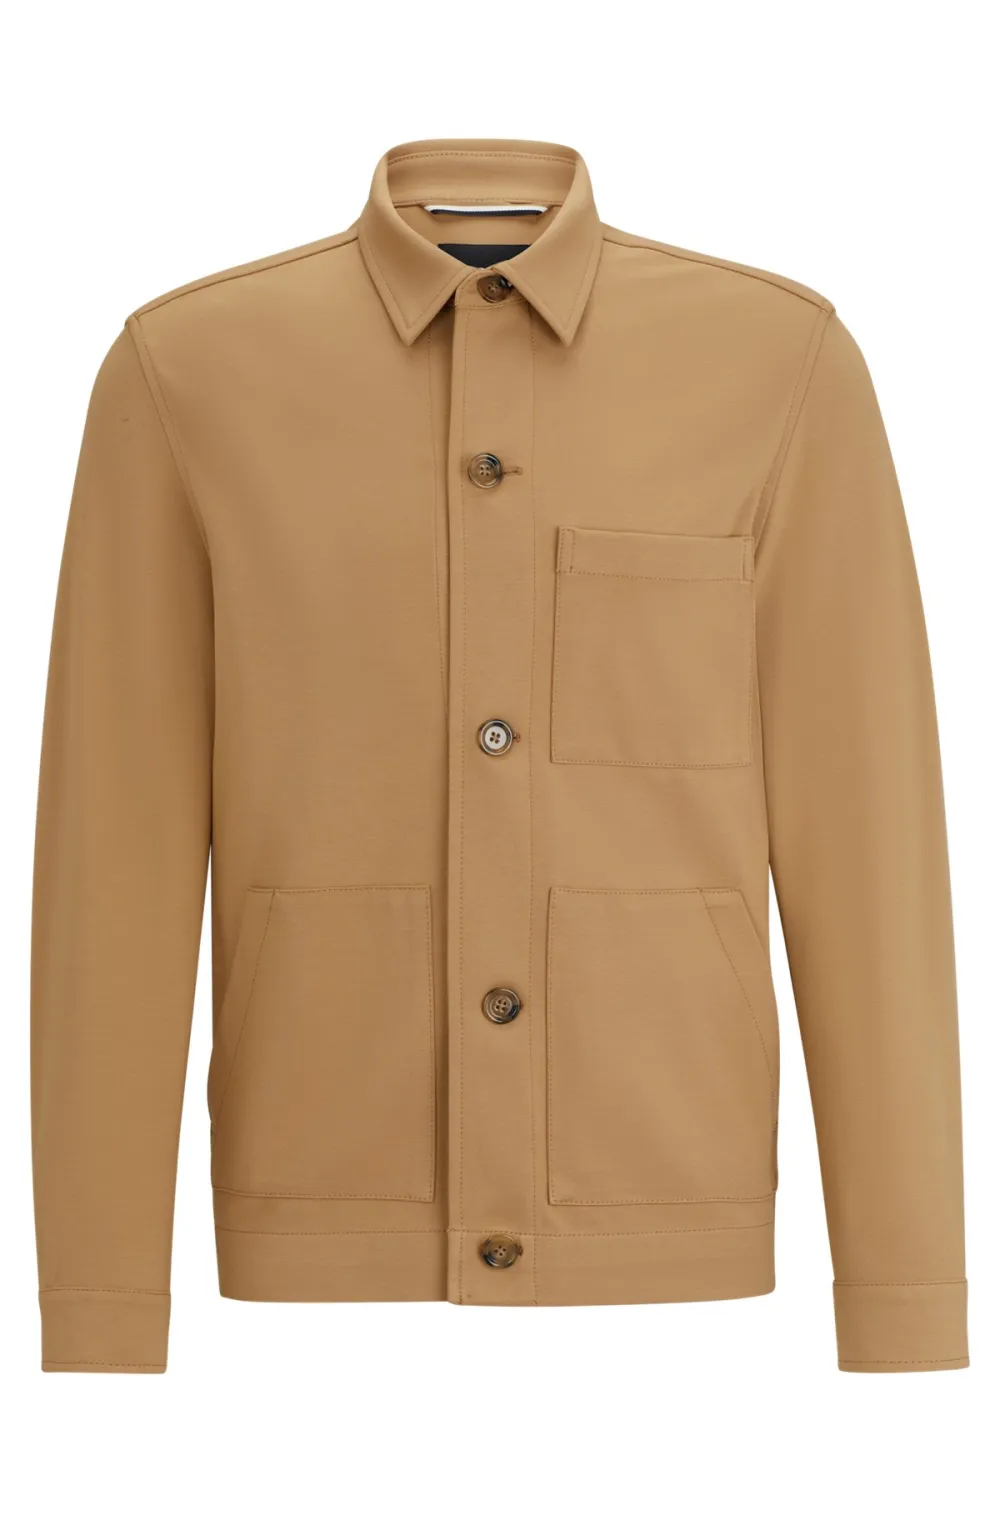 Relaxed-fit button-up jacket with patch pockets